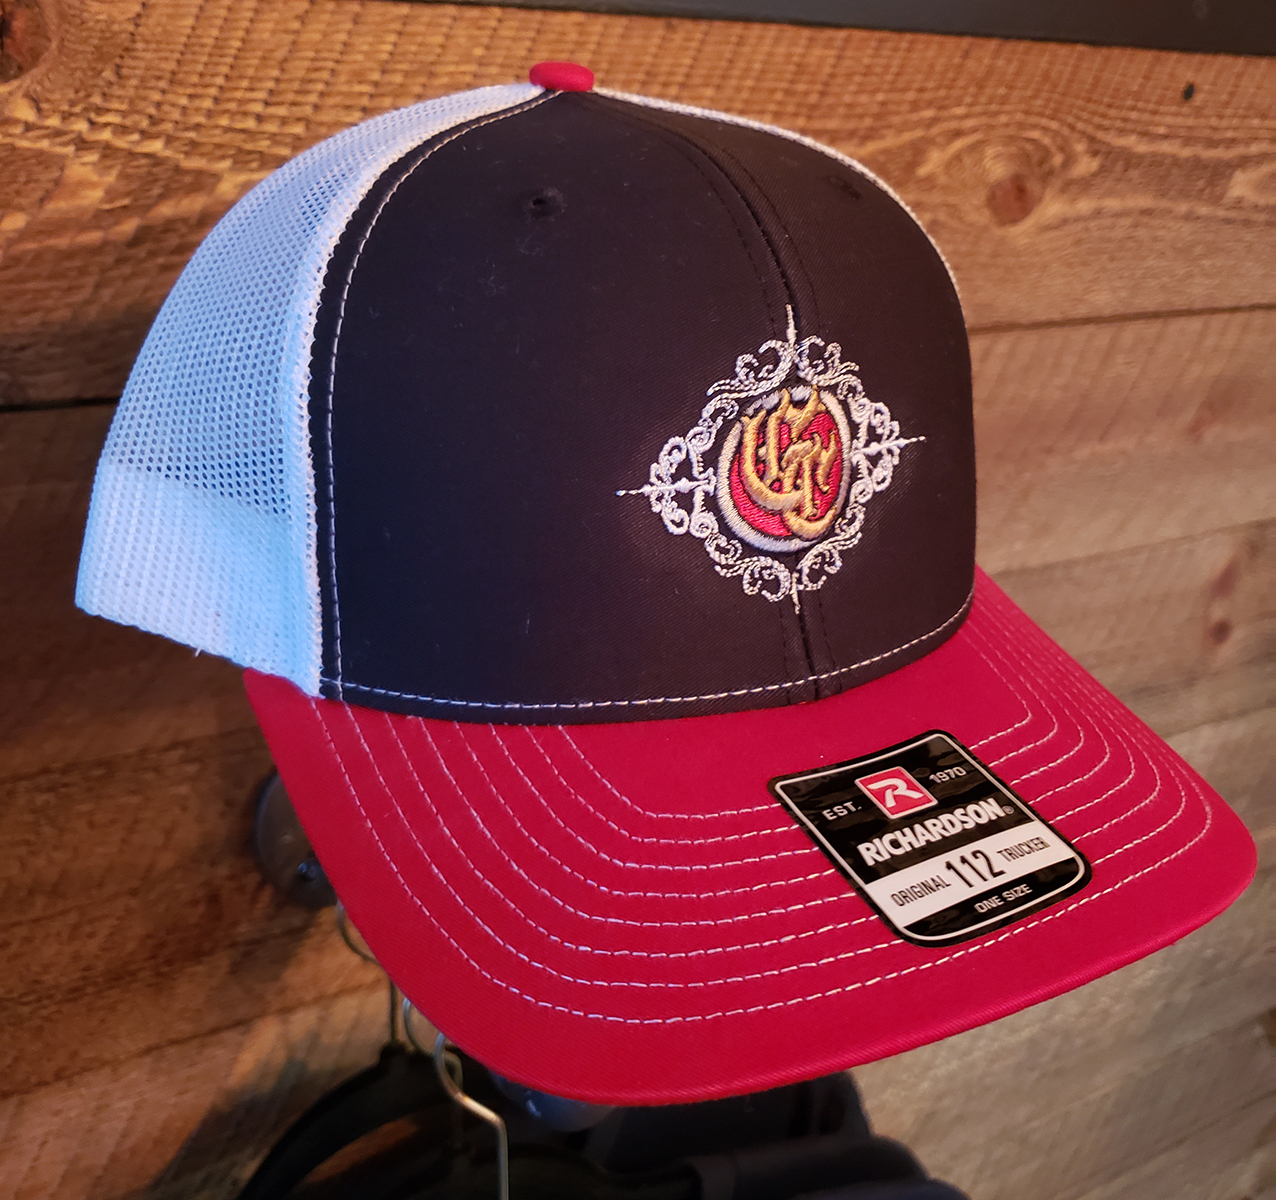 Gold City Hat – Black w/ White Mesh, Red Bill & Color Logo – Gold 